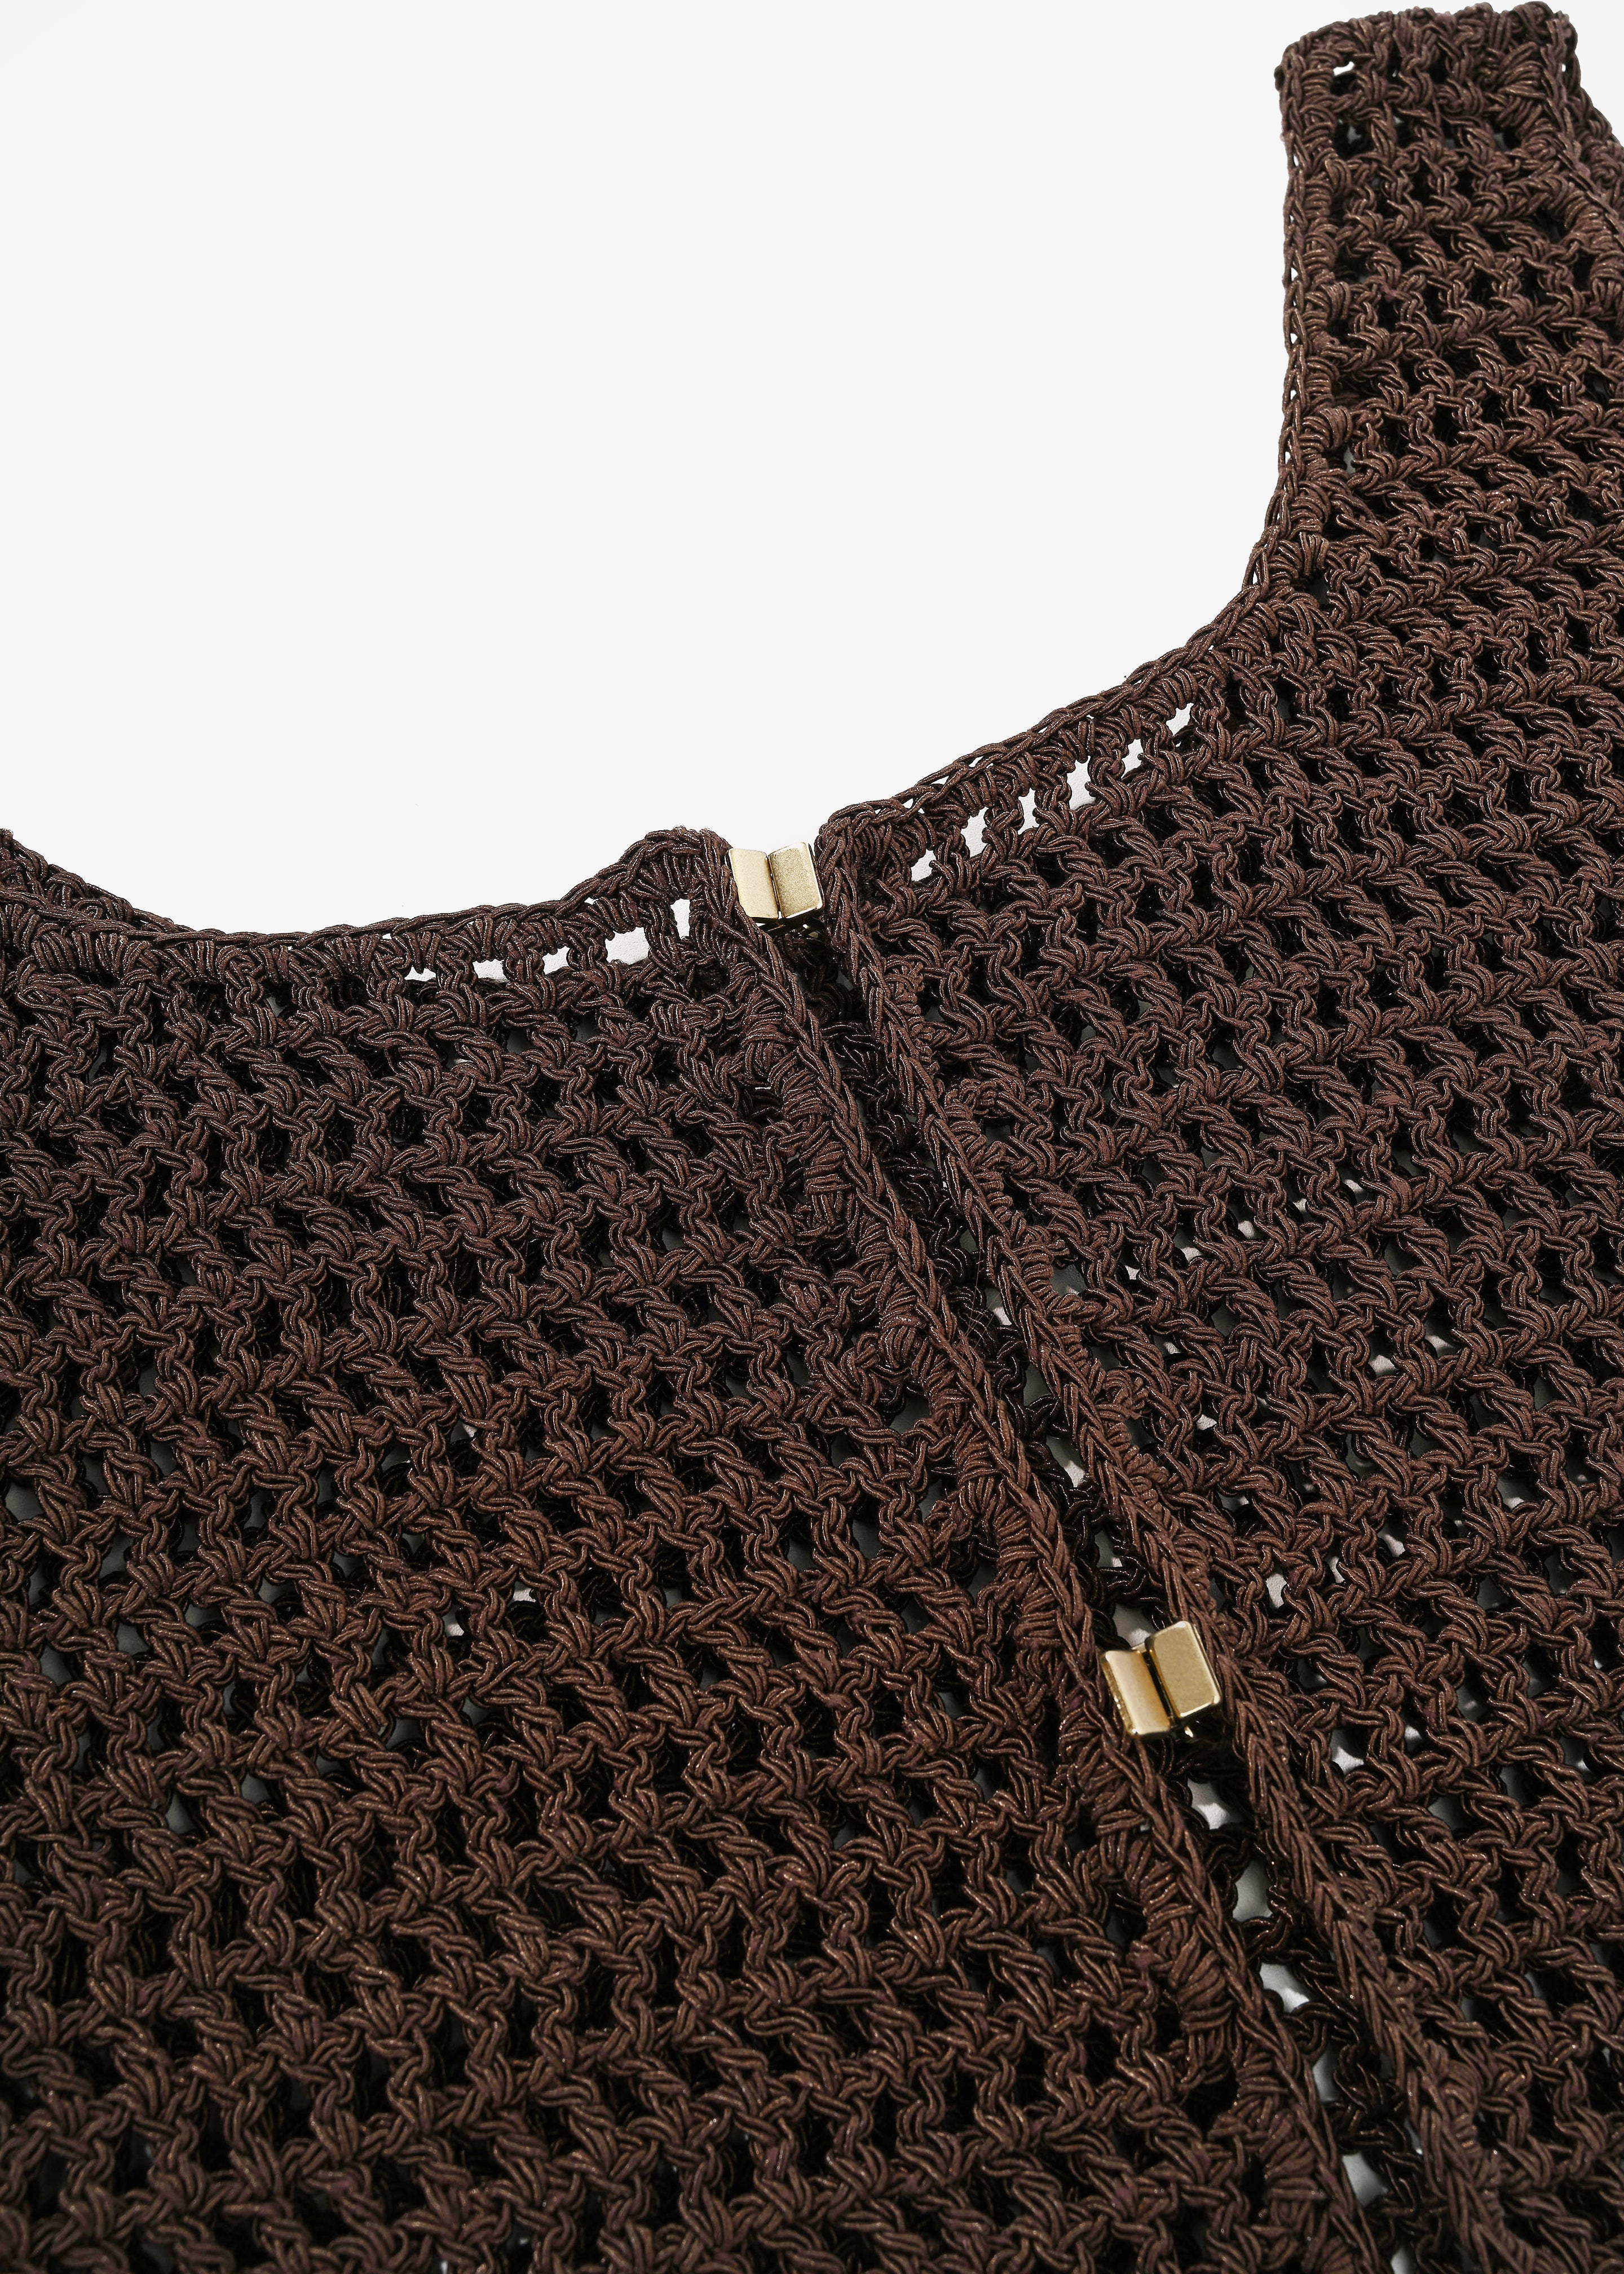 Low Classic Handmade 2-Way Knit Top - Brown – The Frankie Shop